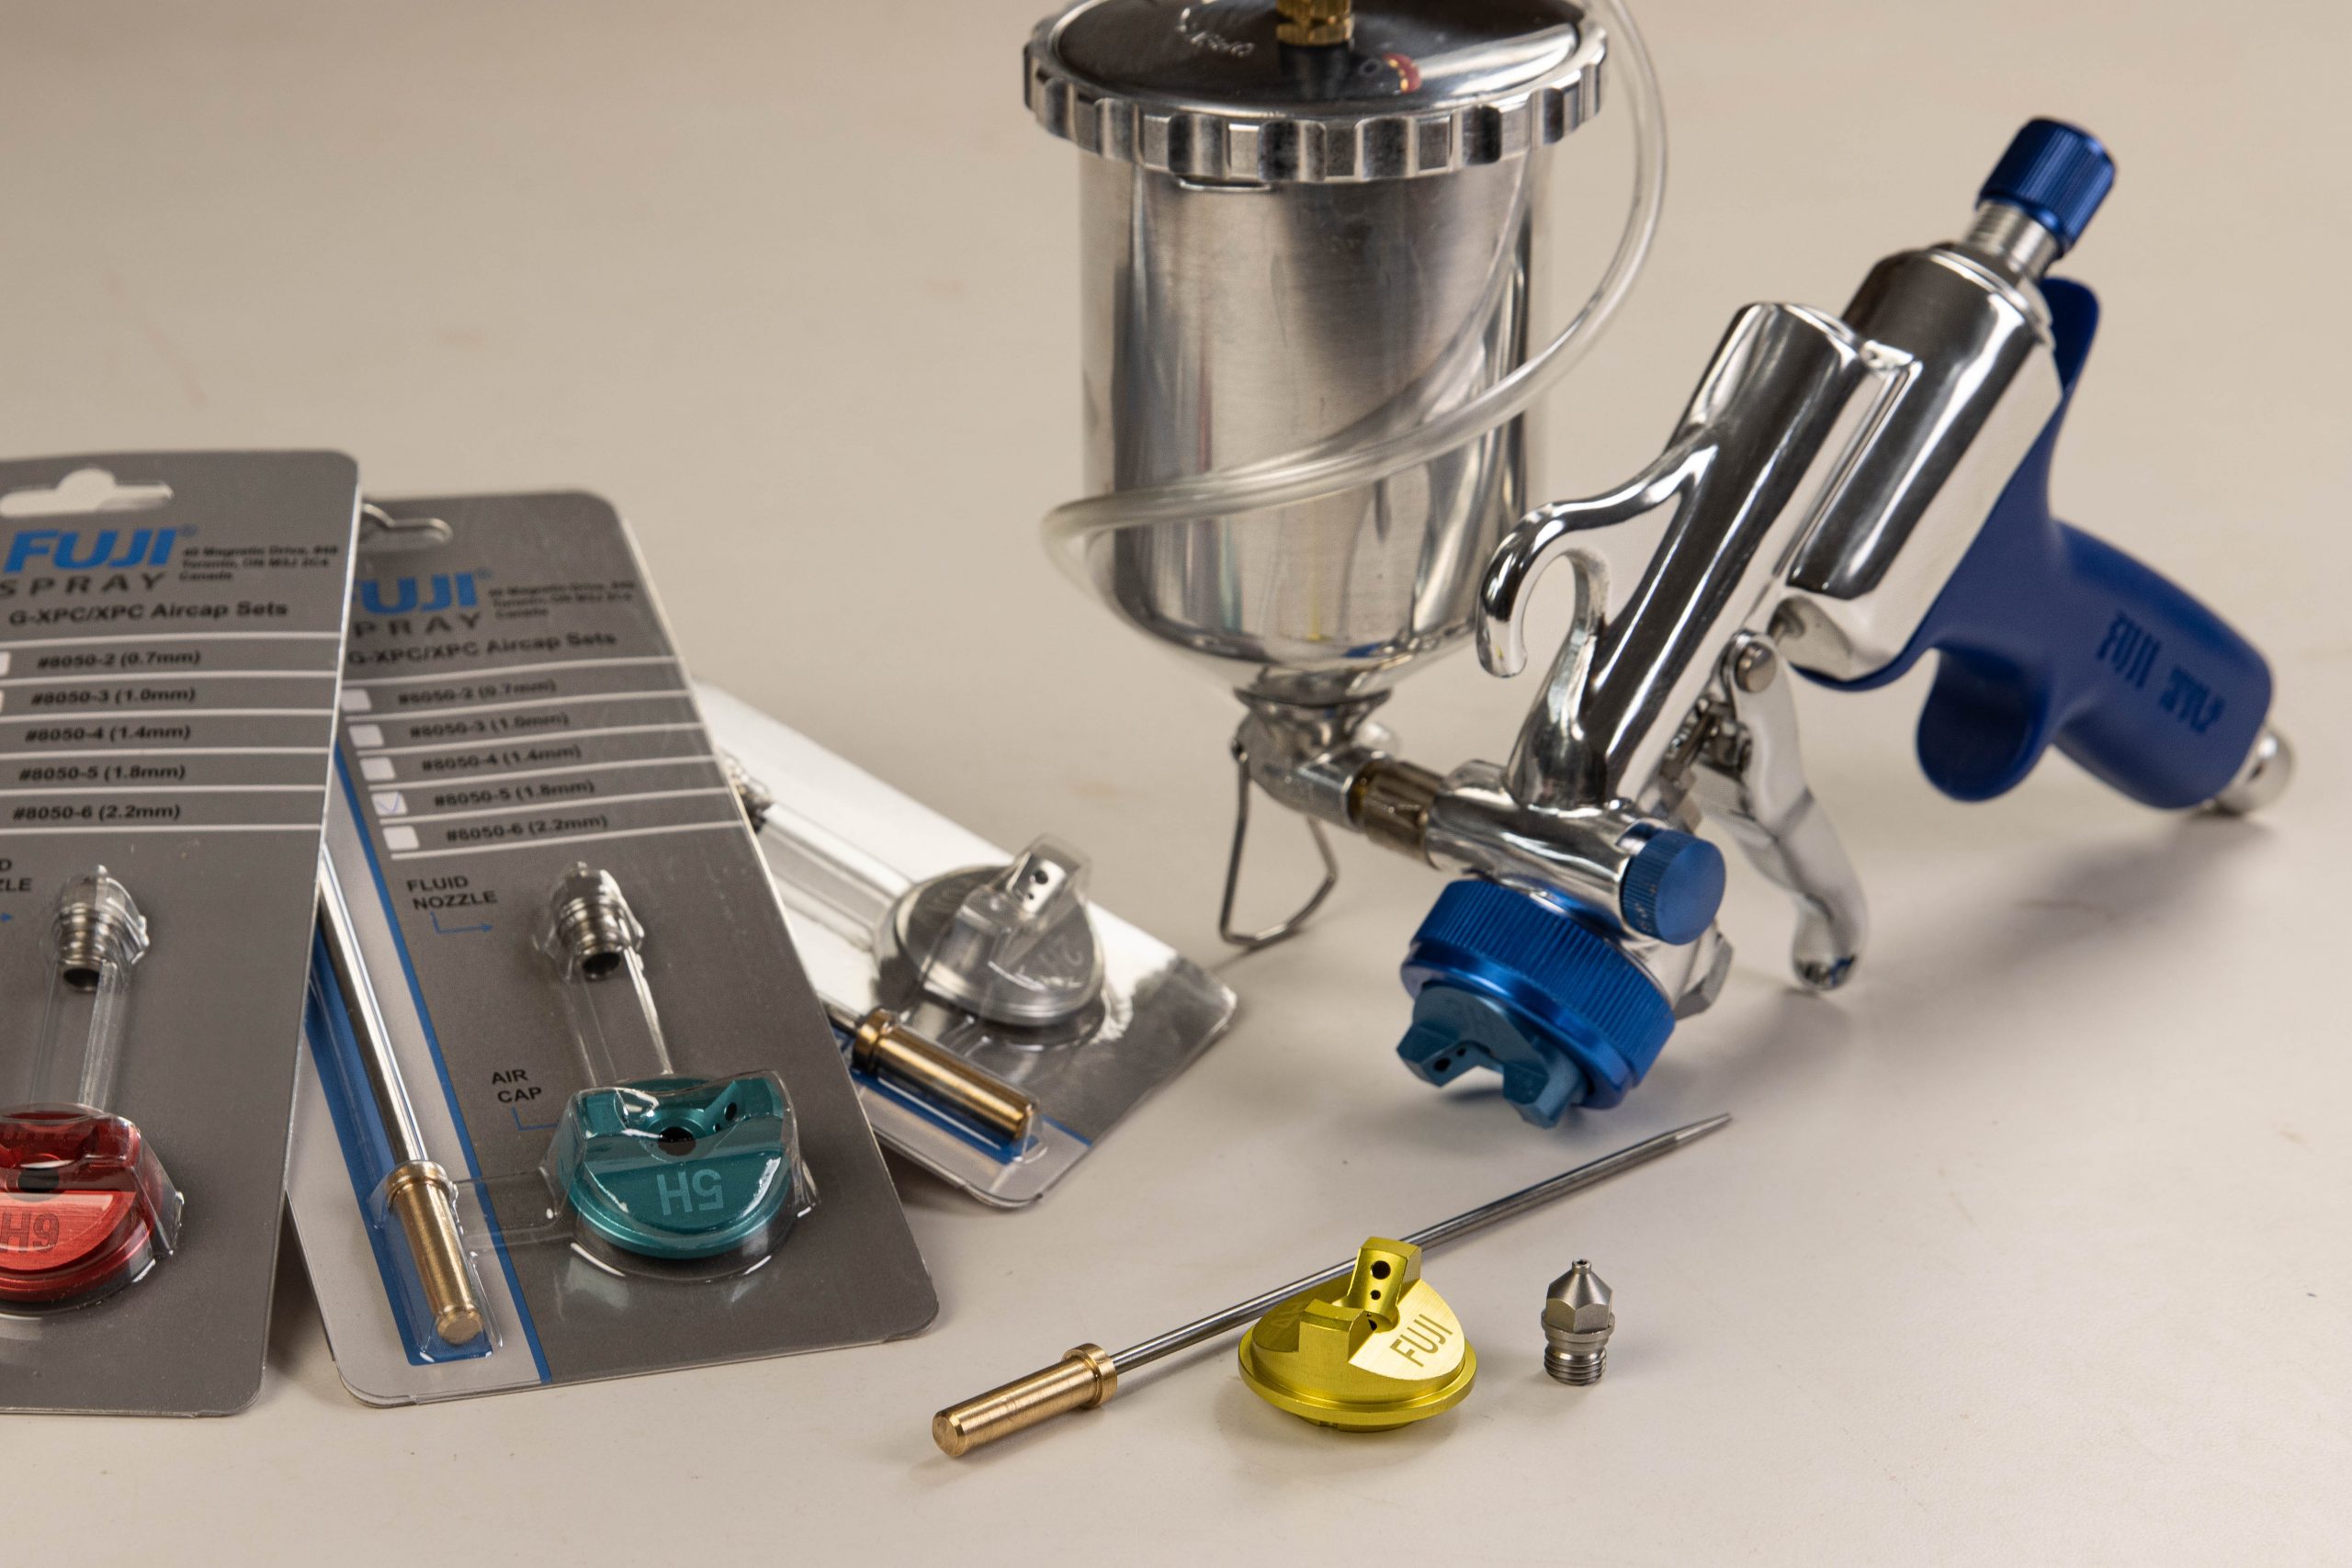 M-Model Gravity Feed Spray Gun with different air cap sets